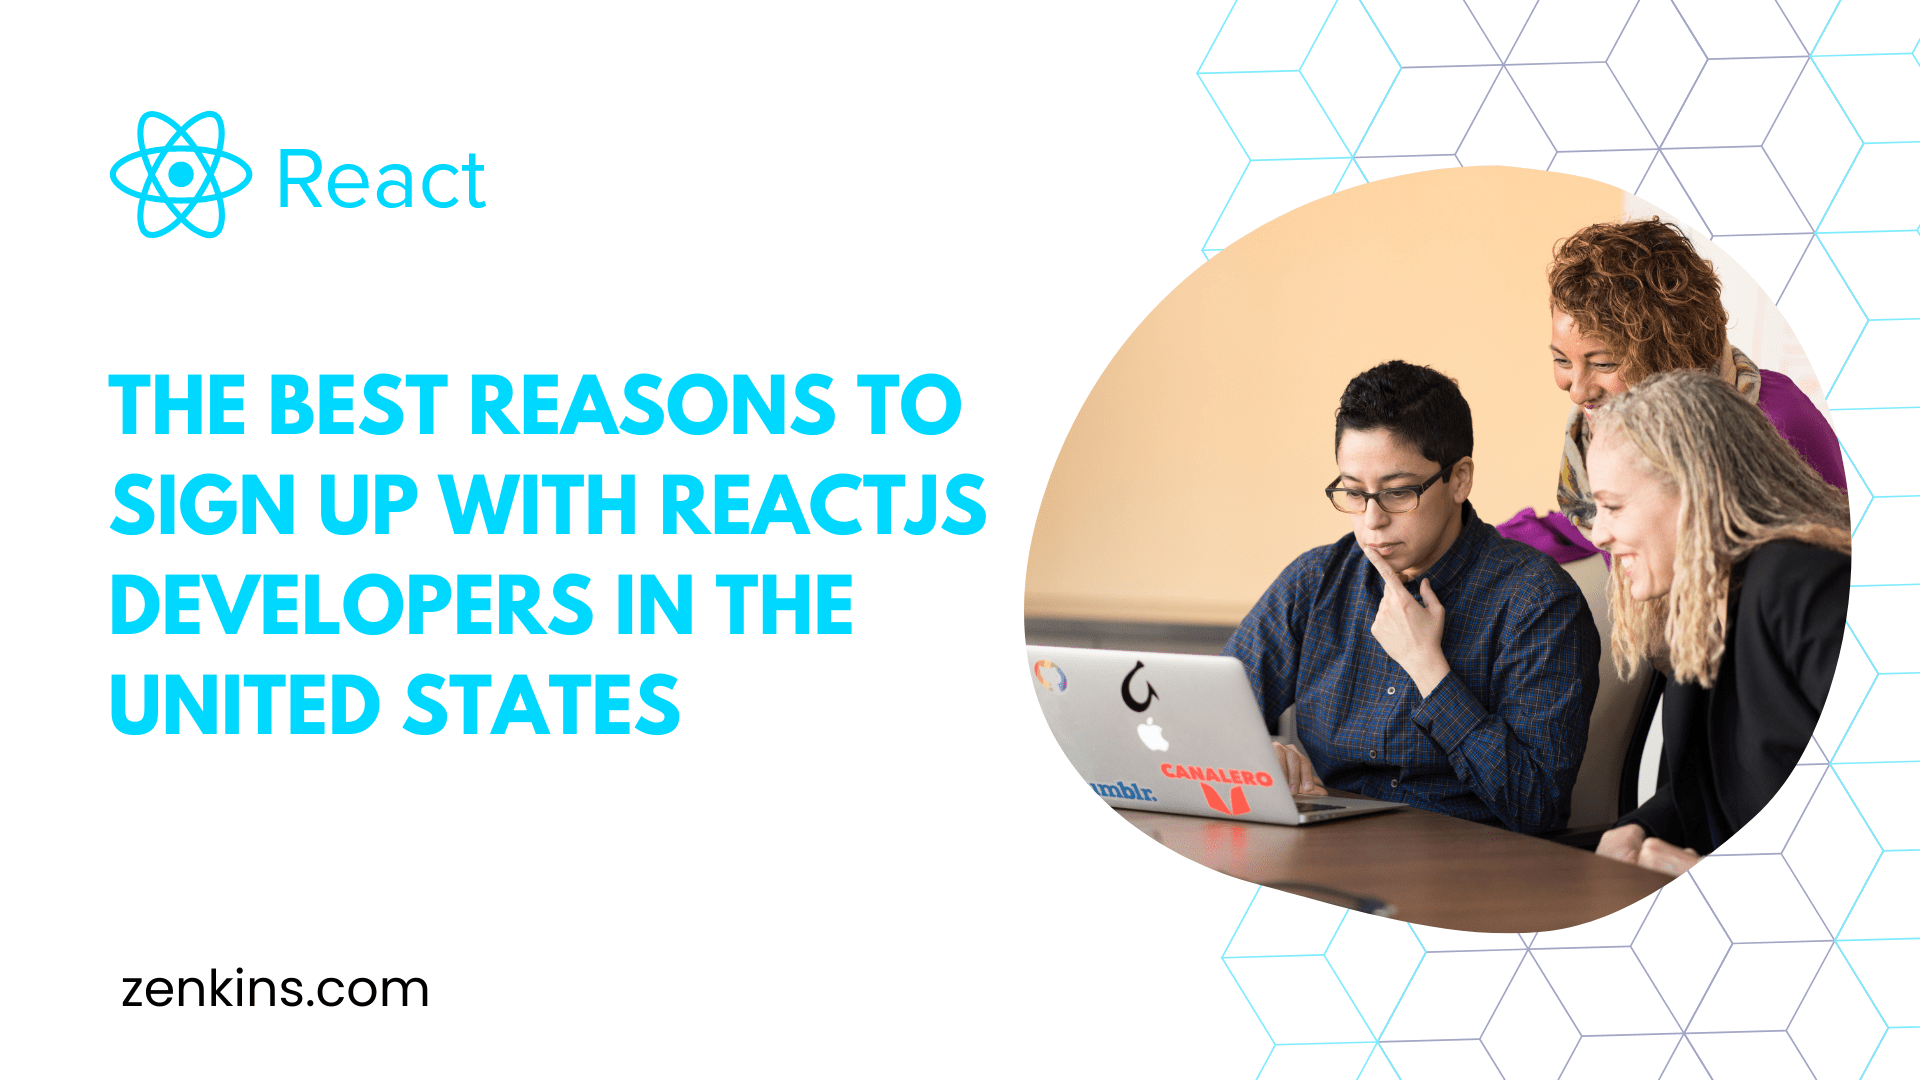 Hire ReactJS developers in the United States